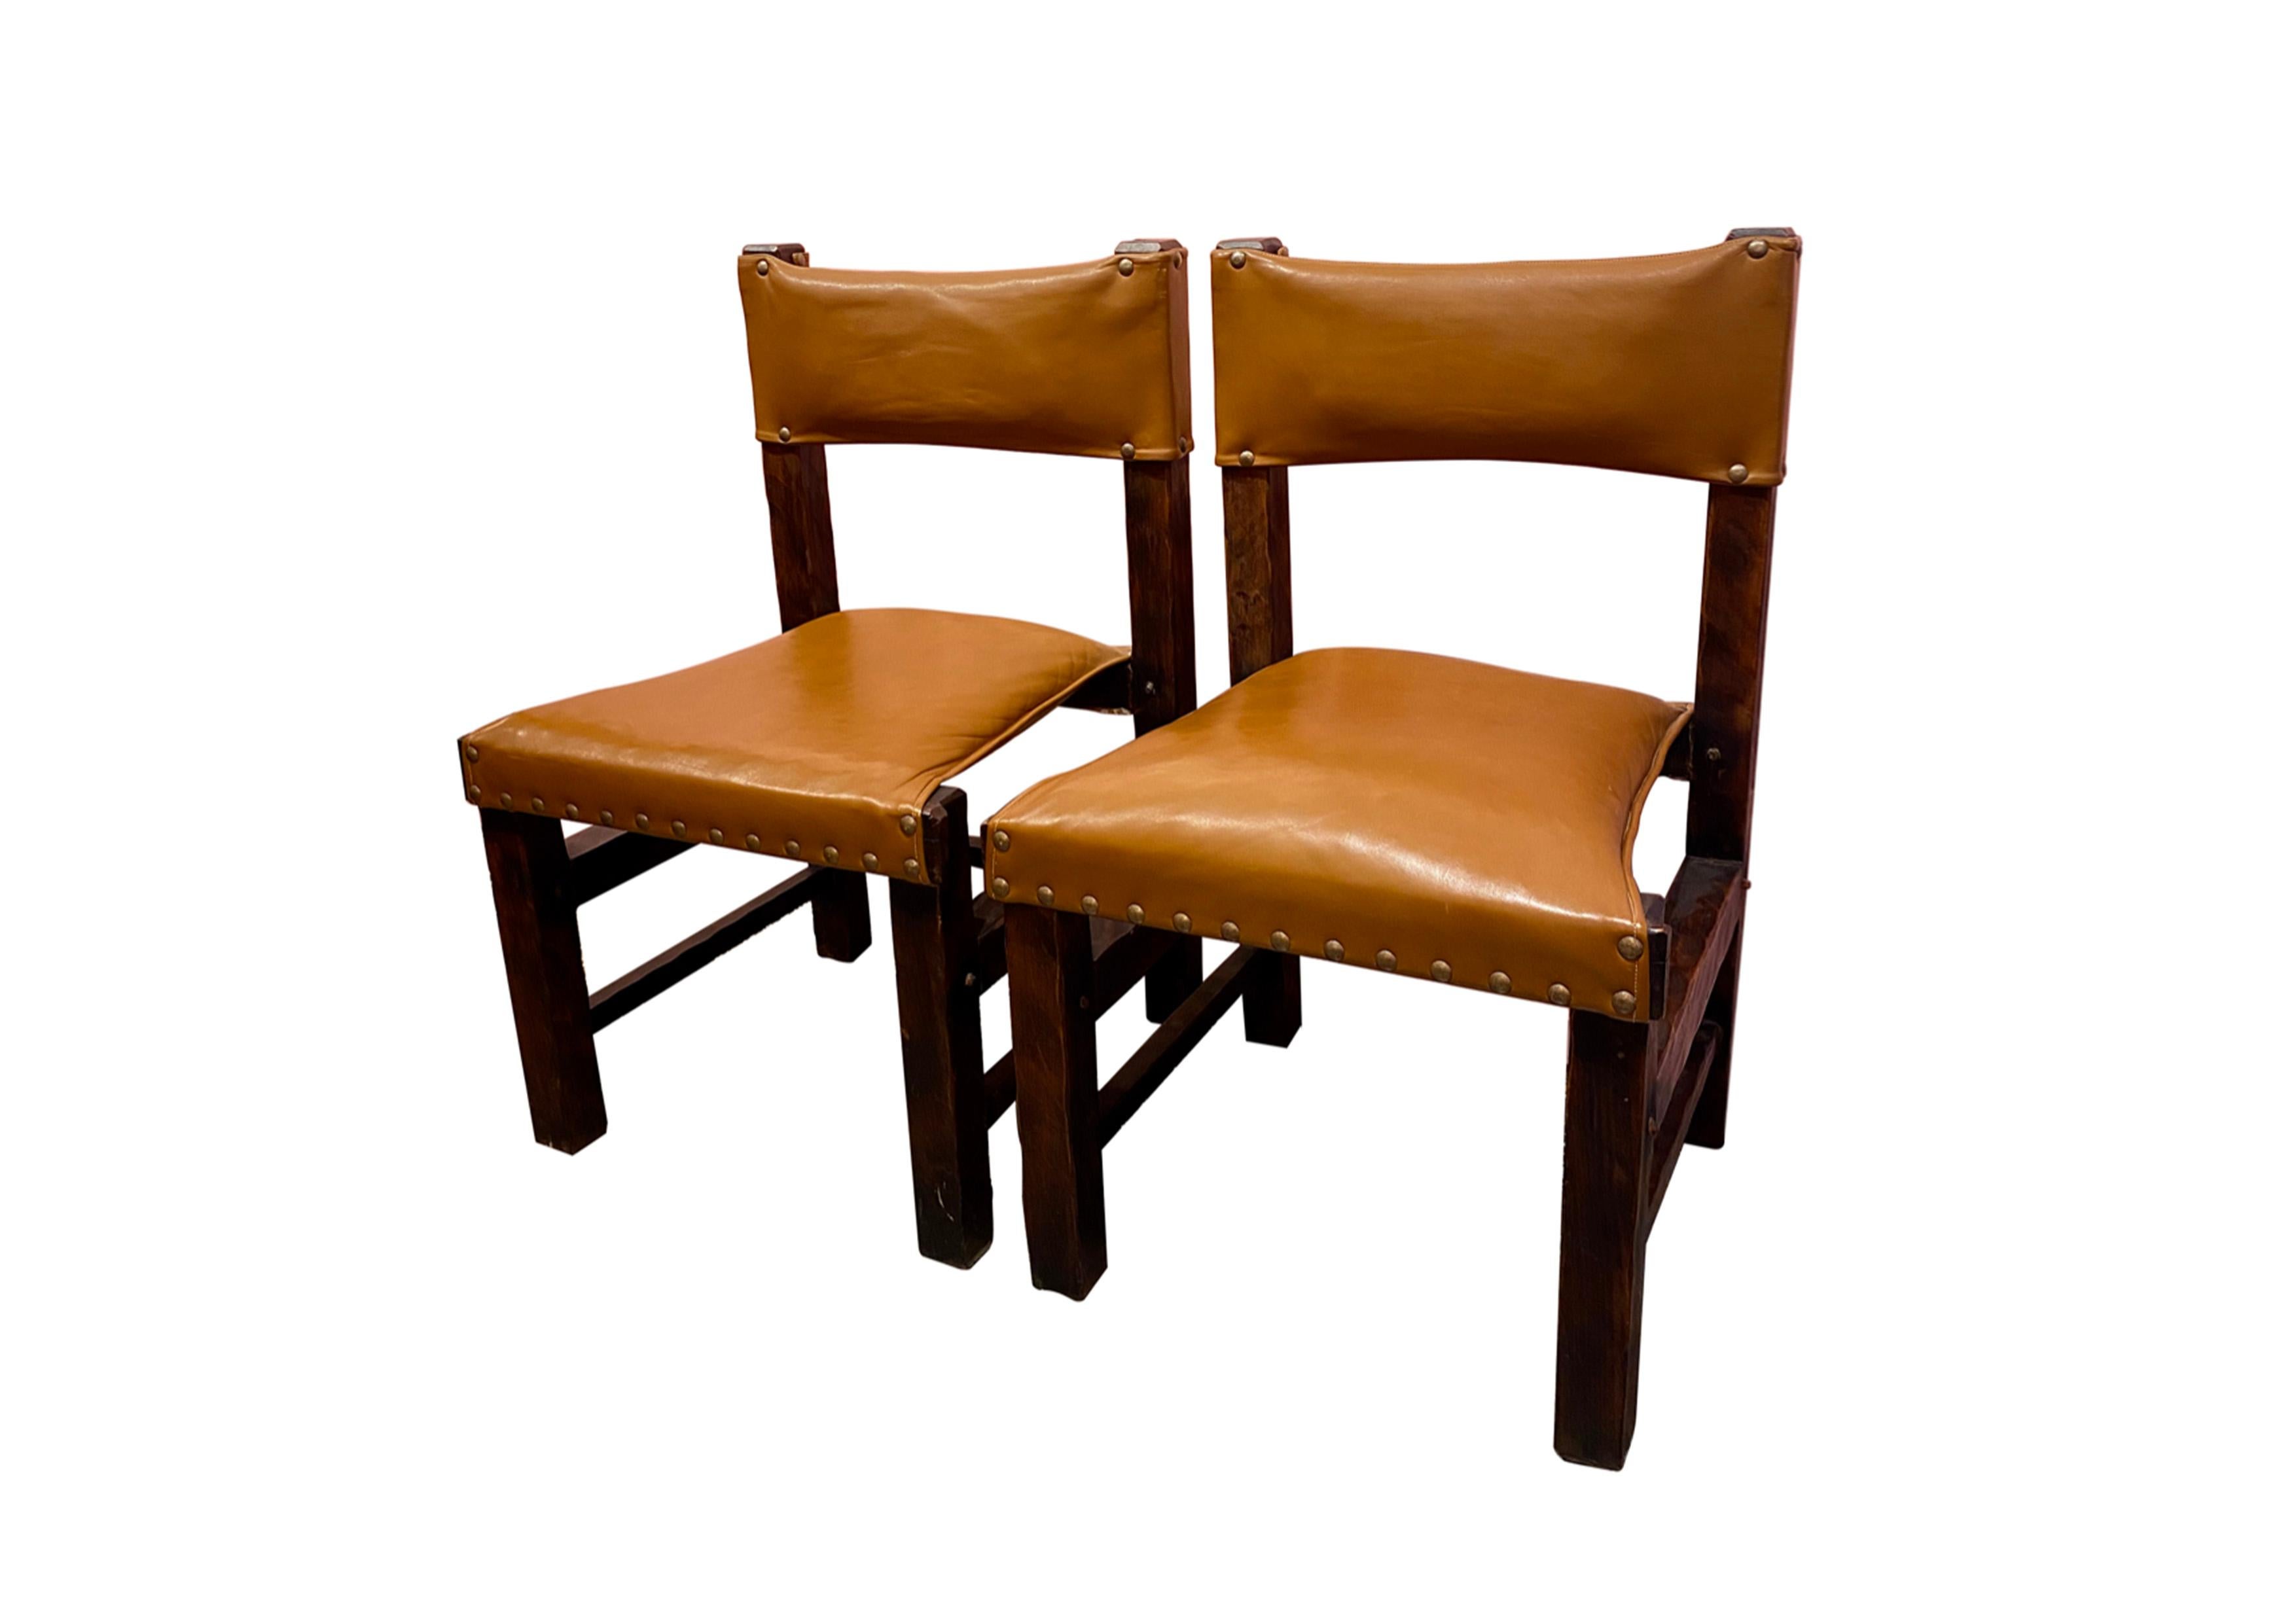 Set of six Brazilian chairs from the 60s. 
Solid wood structure, back and seat in cognac leather with studs offering original seat and back detailing.

Wear consistent with age and use. Minor defects.